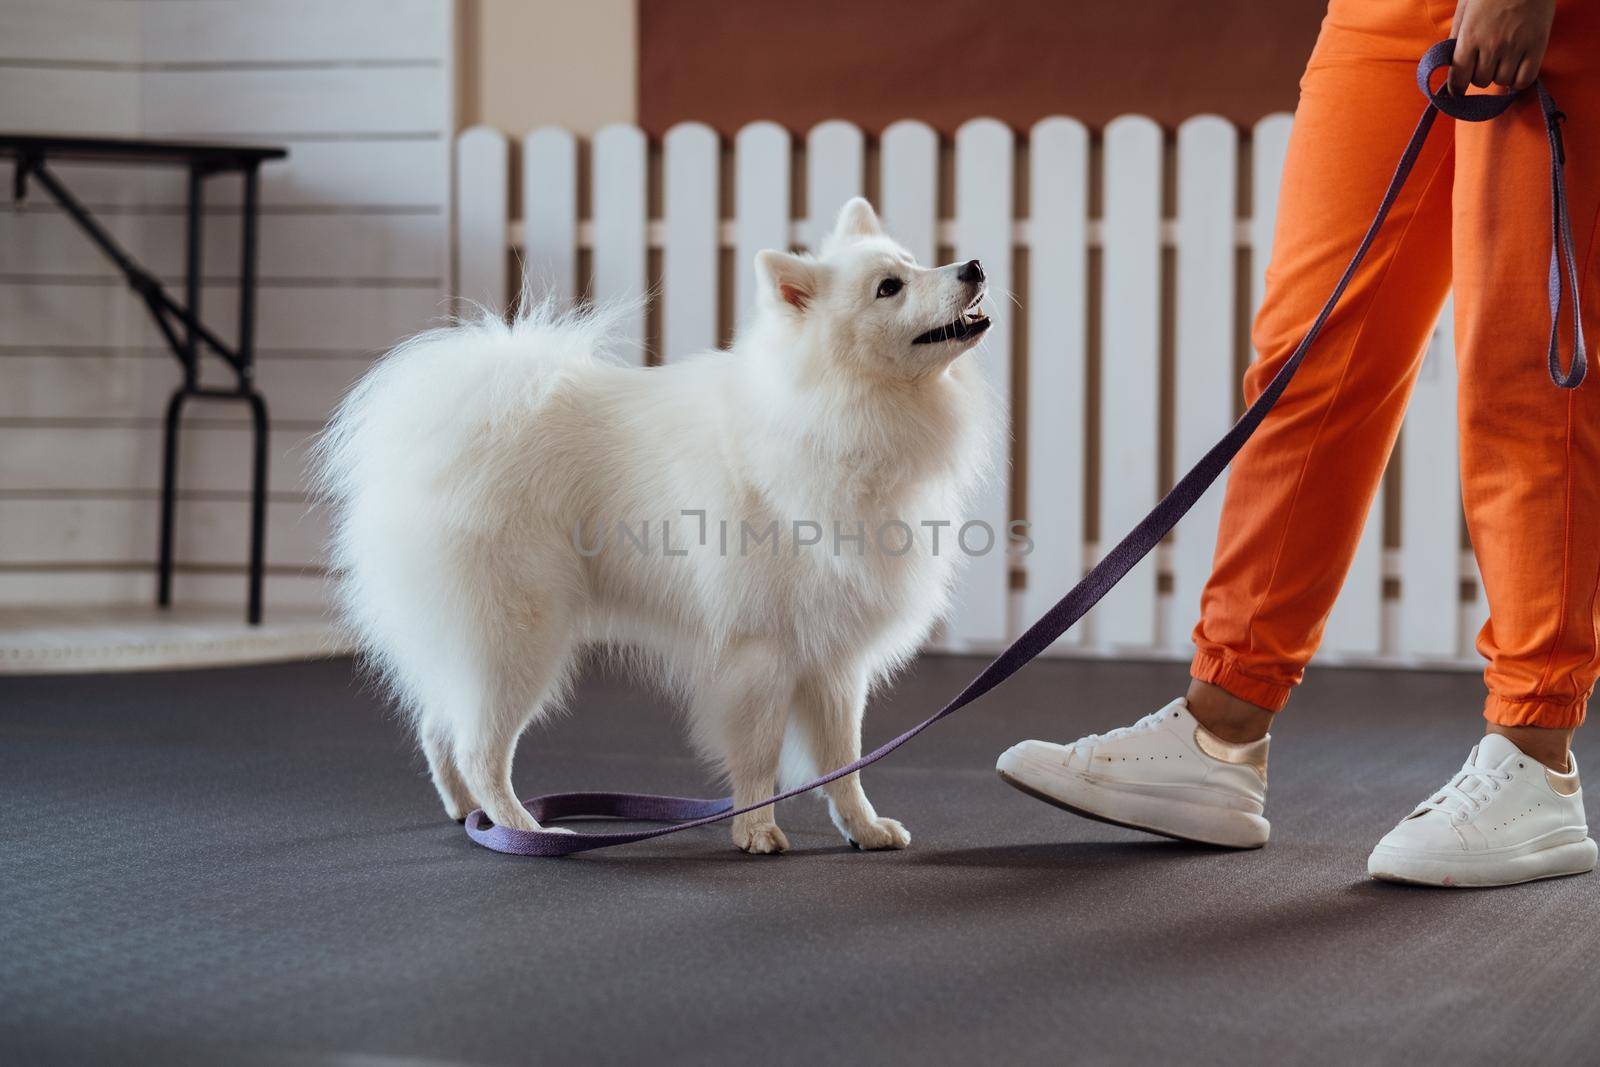 Snow-white dog Japanese Spitz breed is training in pet house by Romvy